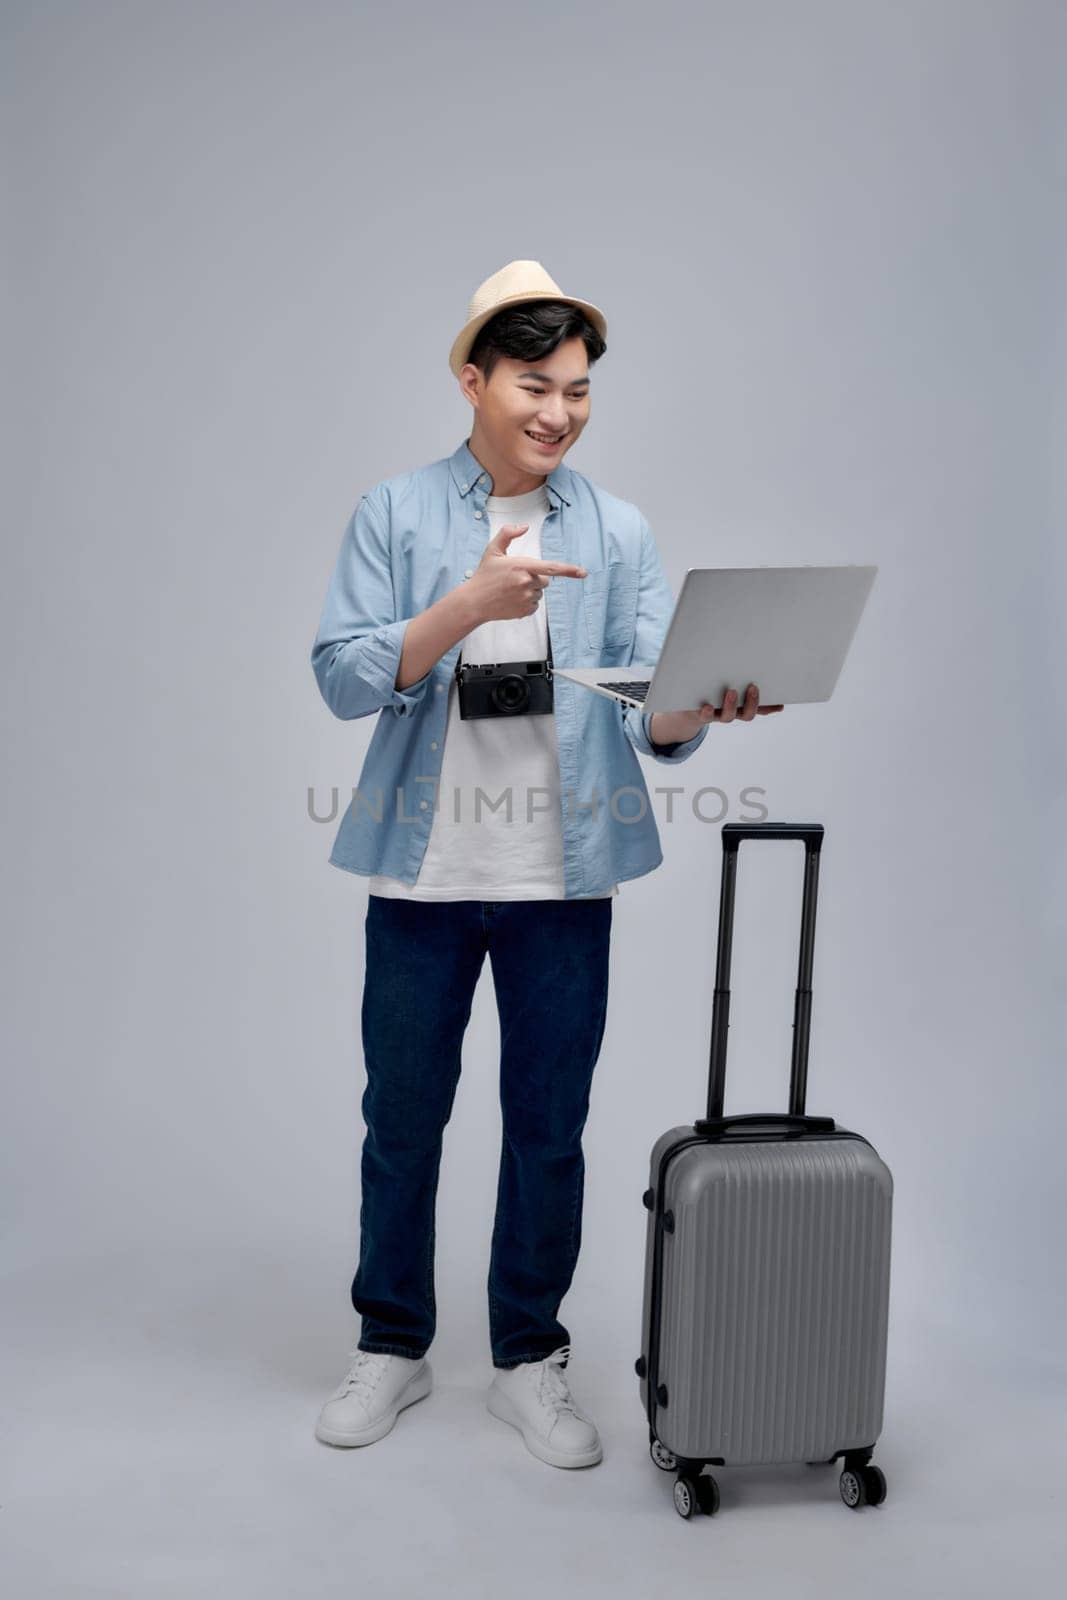 Young guy standing with luggage suitcase browsing internet on laptop concentrated smiling joyful by makidotvn